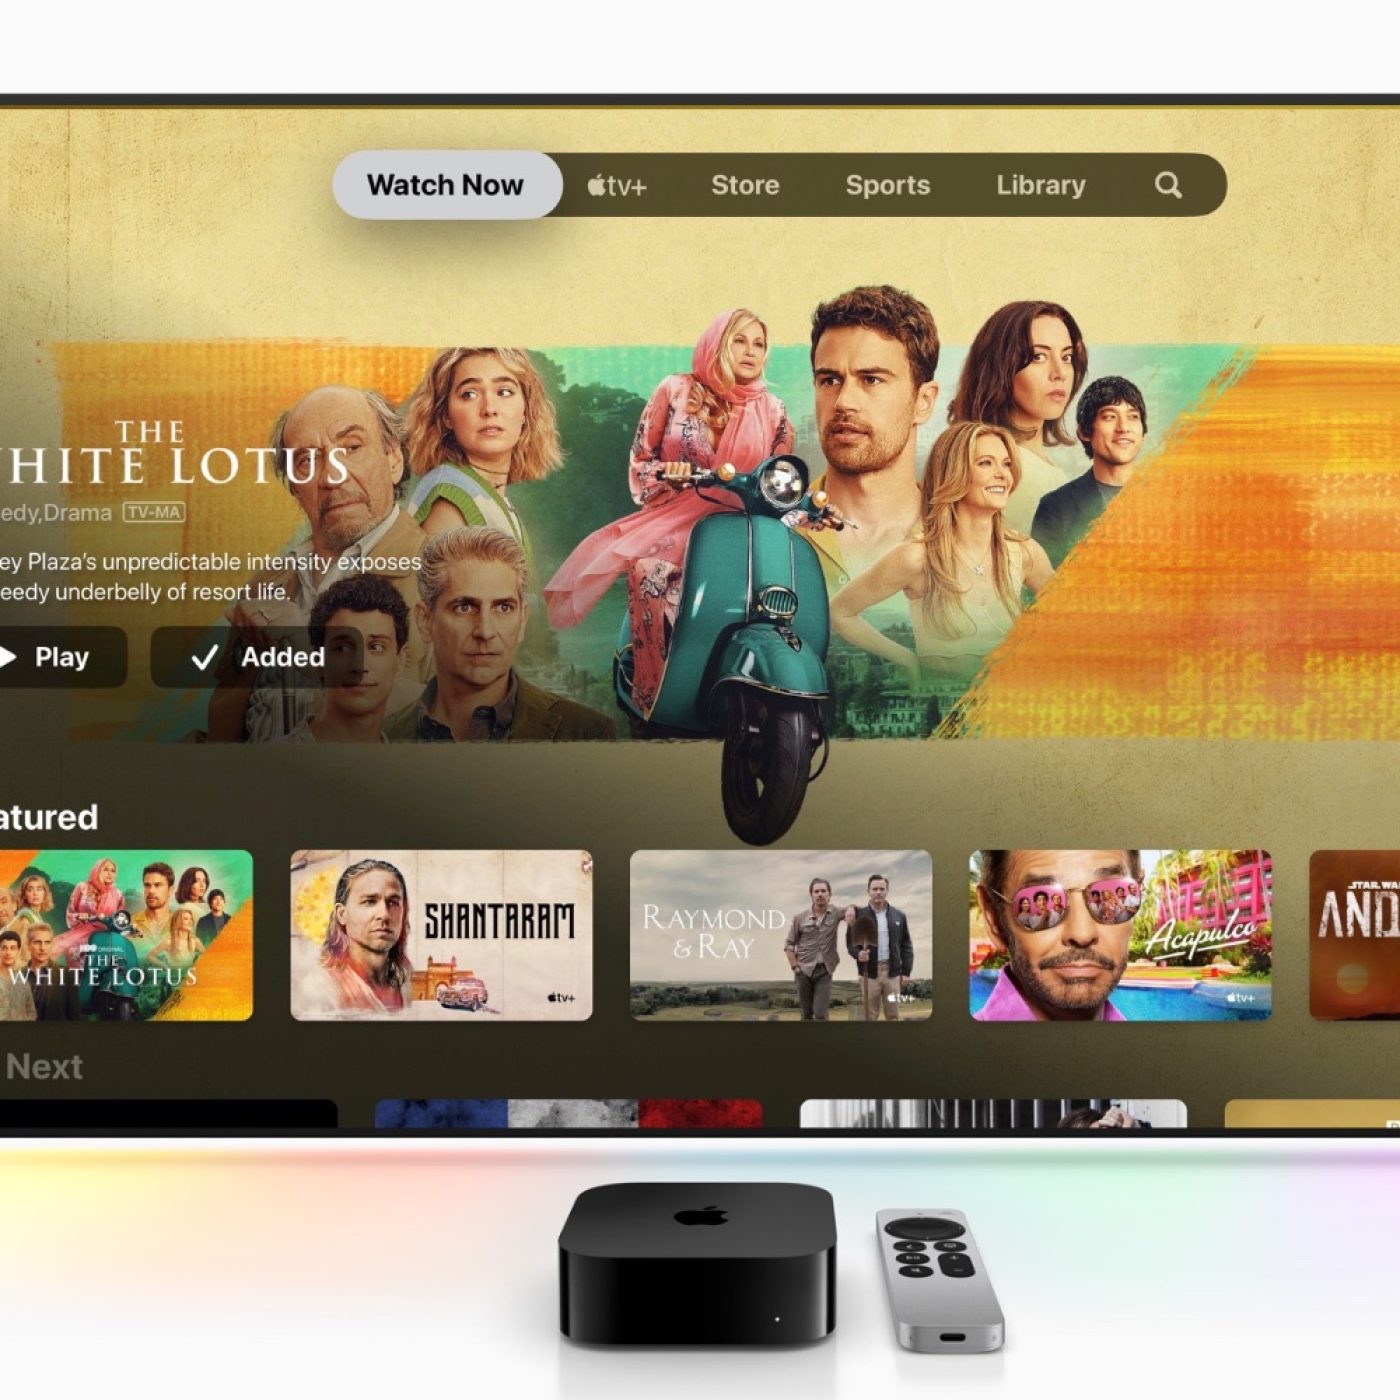 Apple TV app is 'Up Next' with tvOS 16.2